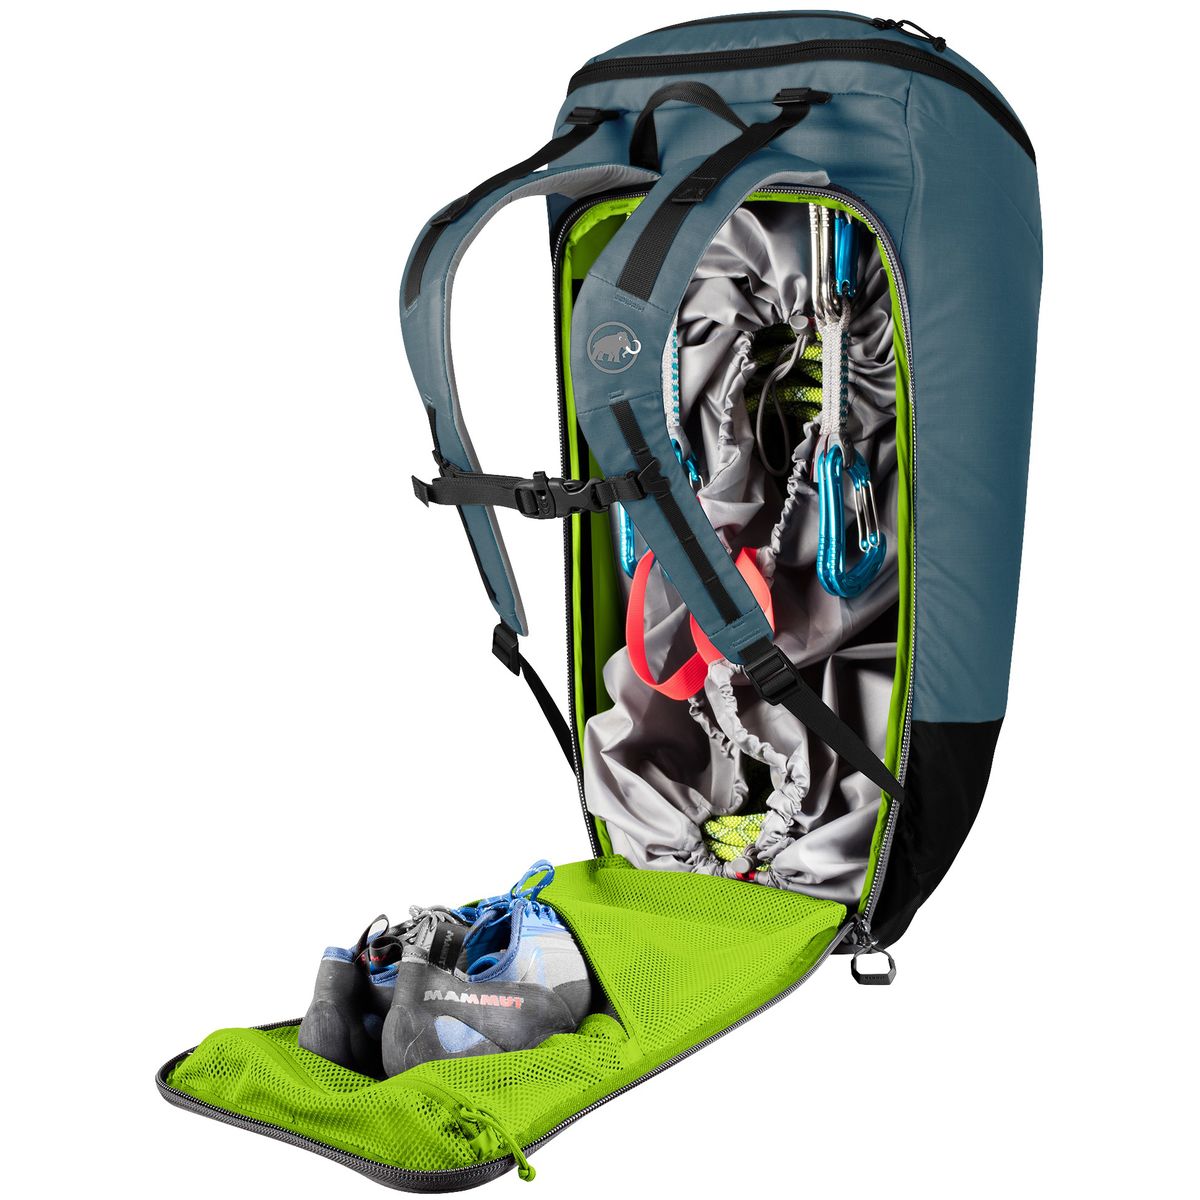 boter catalogus Grootte Mammut Neon Gear 45L Backpack - Hike & Camp